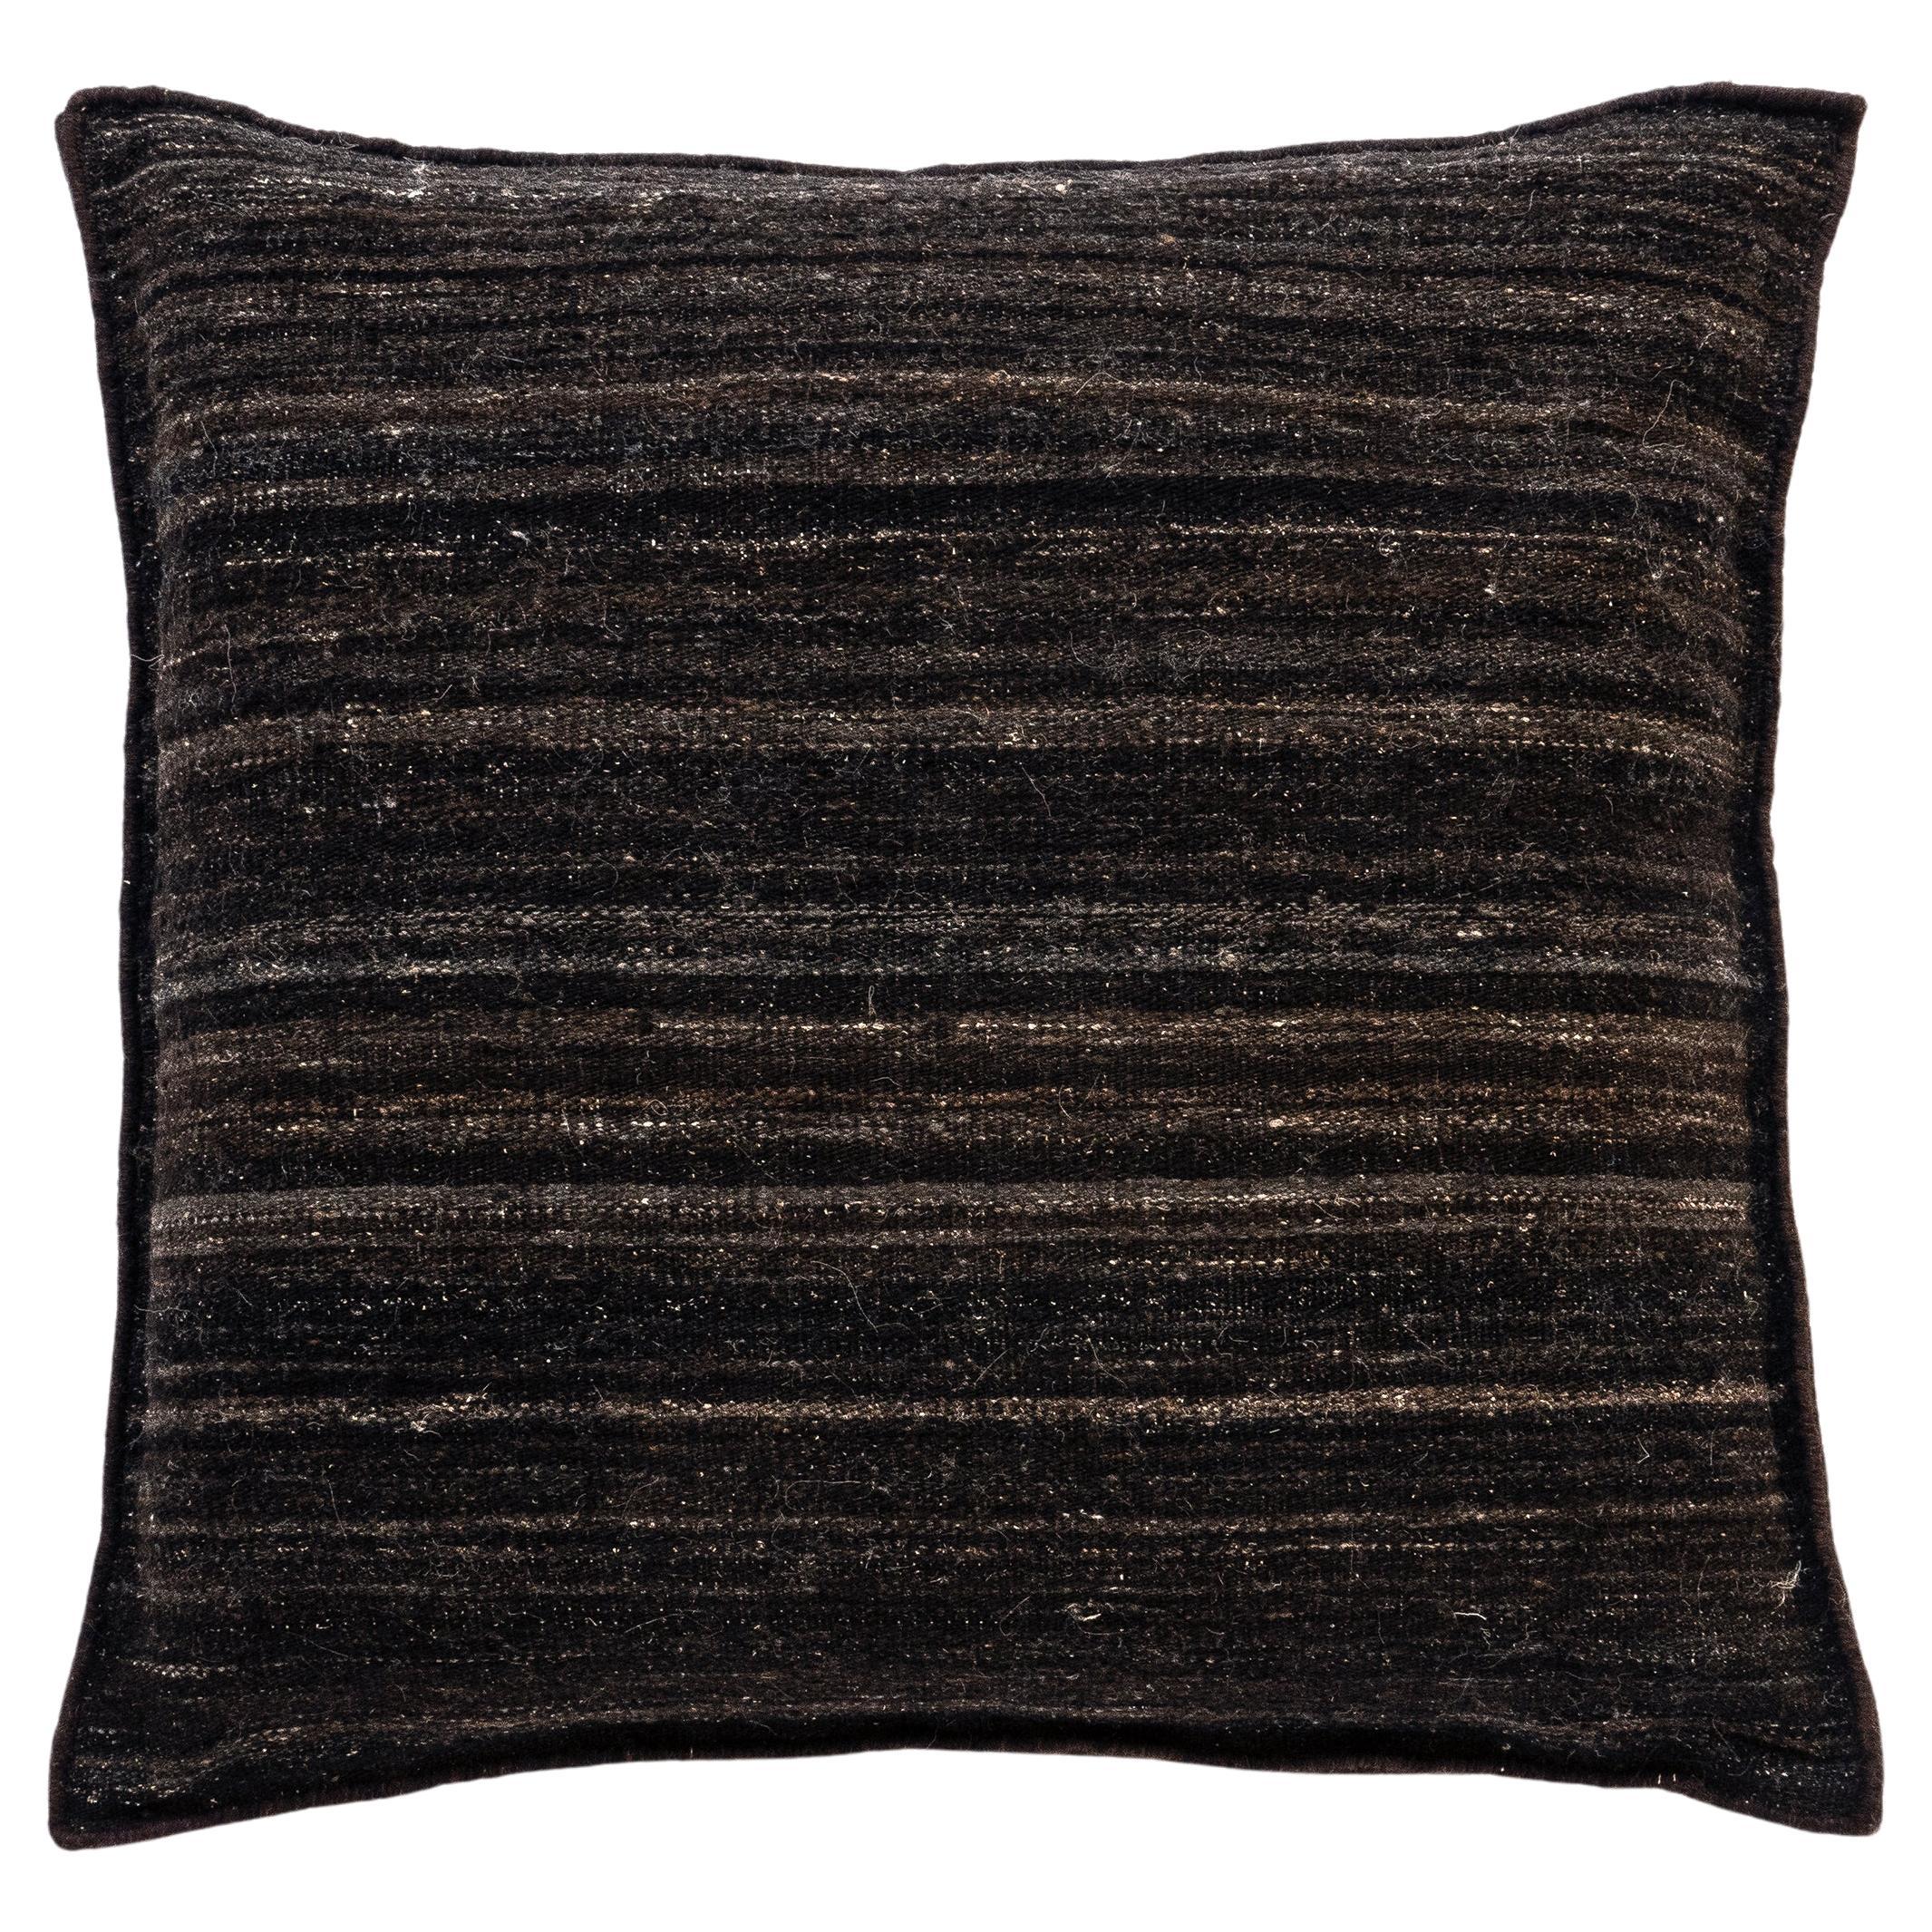 'Wellbeing' Heavy Kilim Cushion by Ilse Crawford for Nanimarquina